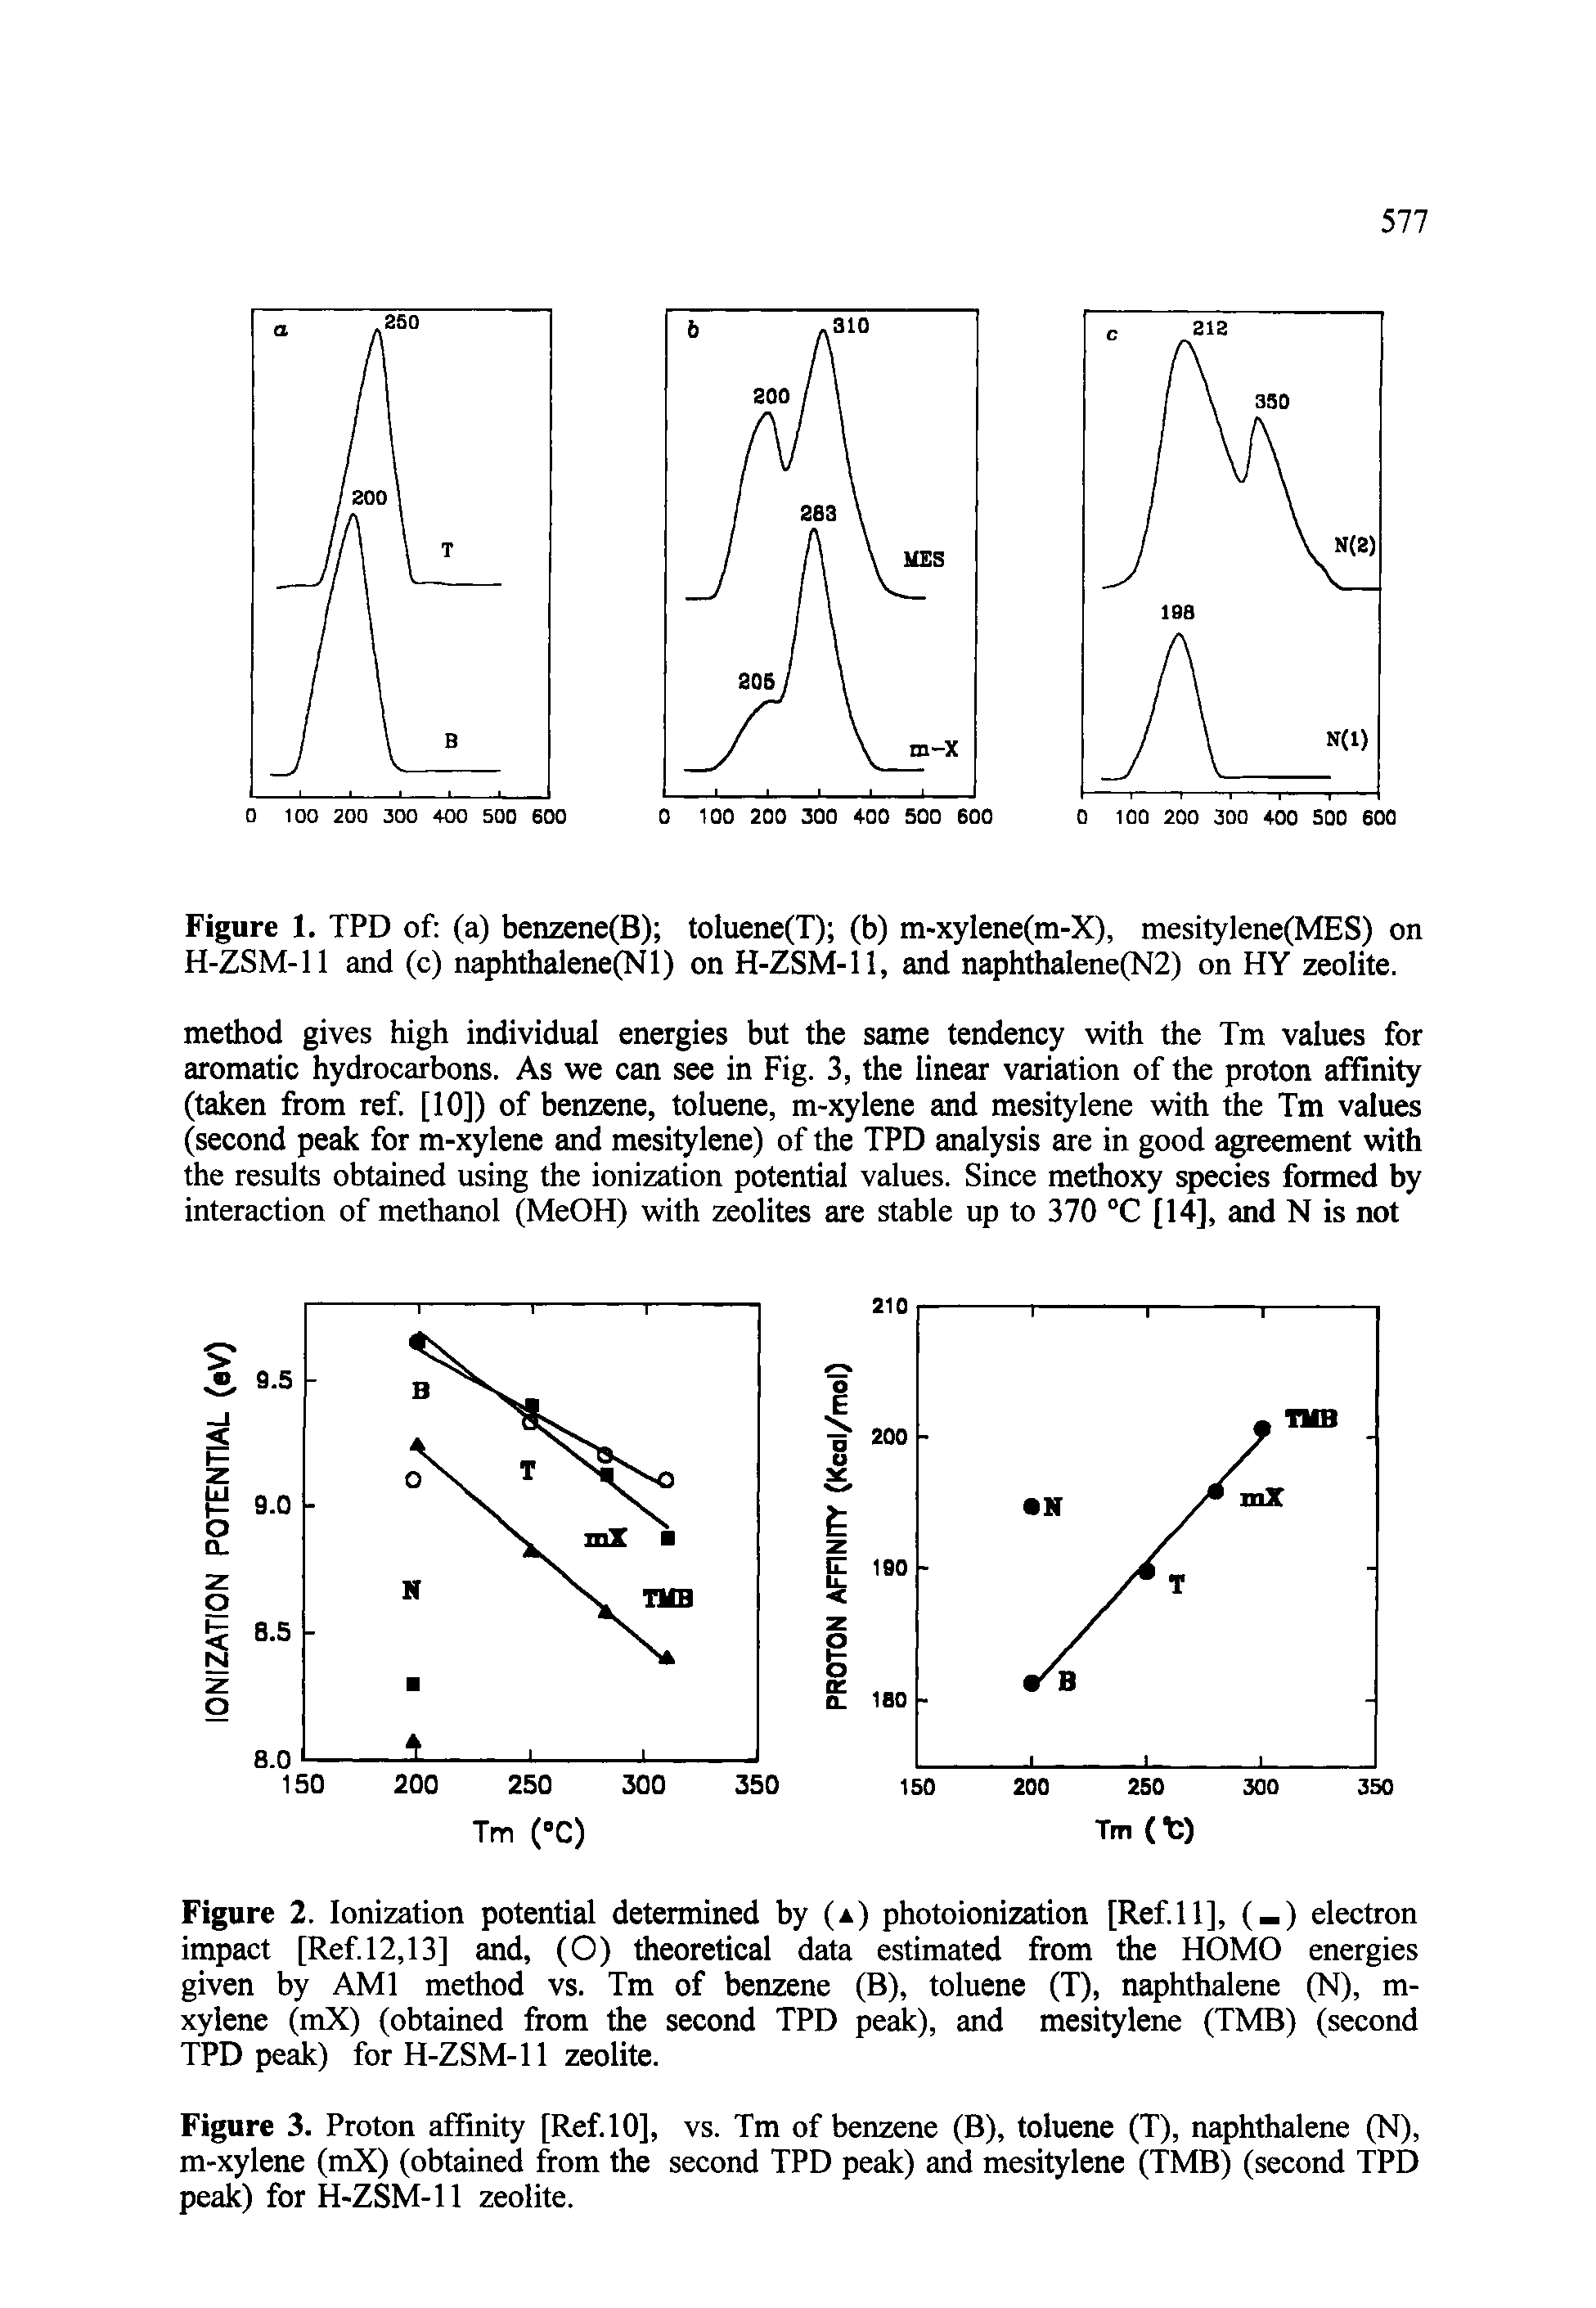 Figure 2. Ionization potential determined by (a) photoionization [Refill], ( ) electron impact [Ref. 12,13] and, (O) theoretical data estimated from the HOMO energies given by AMI method vs. Tm of benzene (B), toluene (T), naphthalene (N), m-xylene (mX) (obtained from the second TPD peak), and mesitylene (TMB) (second TPD peak) for H-ZSM-11 zeolite.